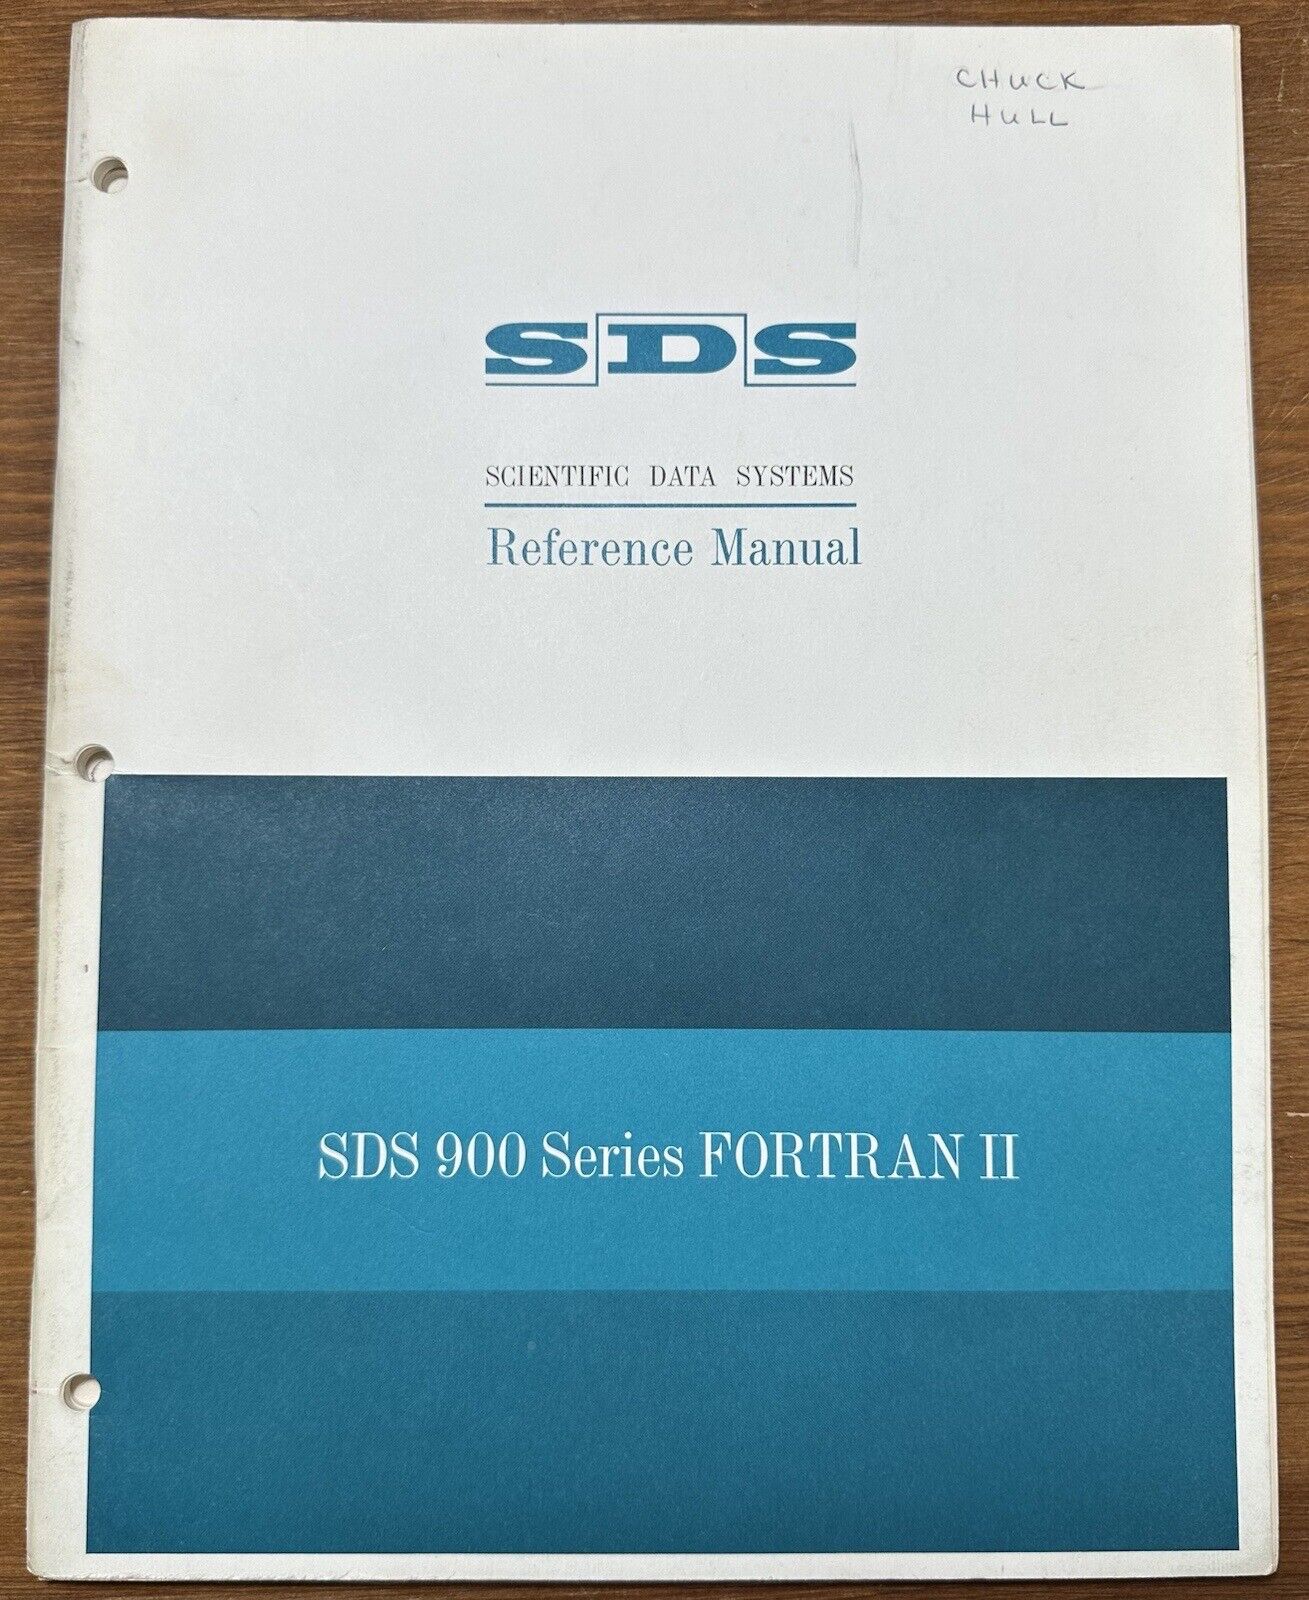 Vintage 1964 SDS Scientific Data Systems 900 Series FORTRAN II Reference Manual